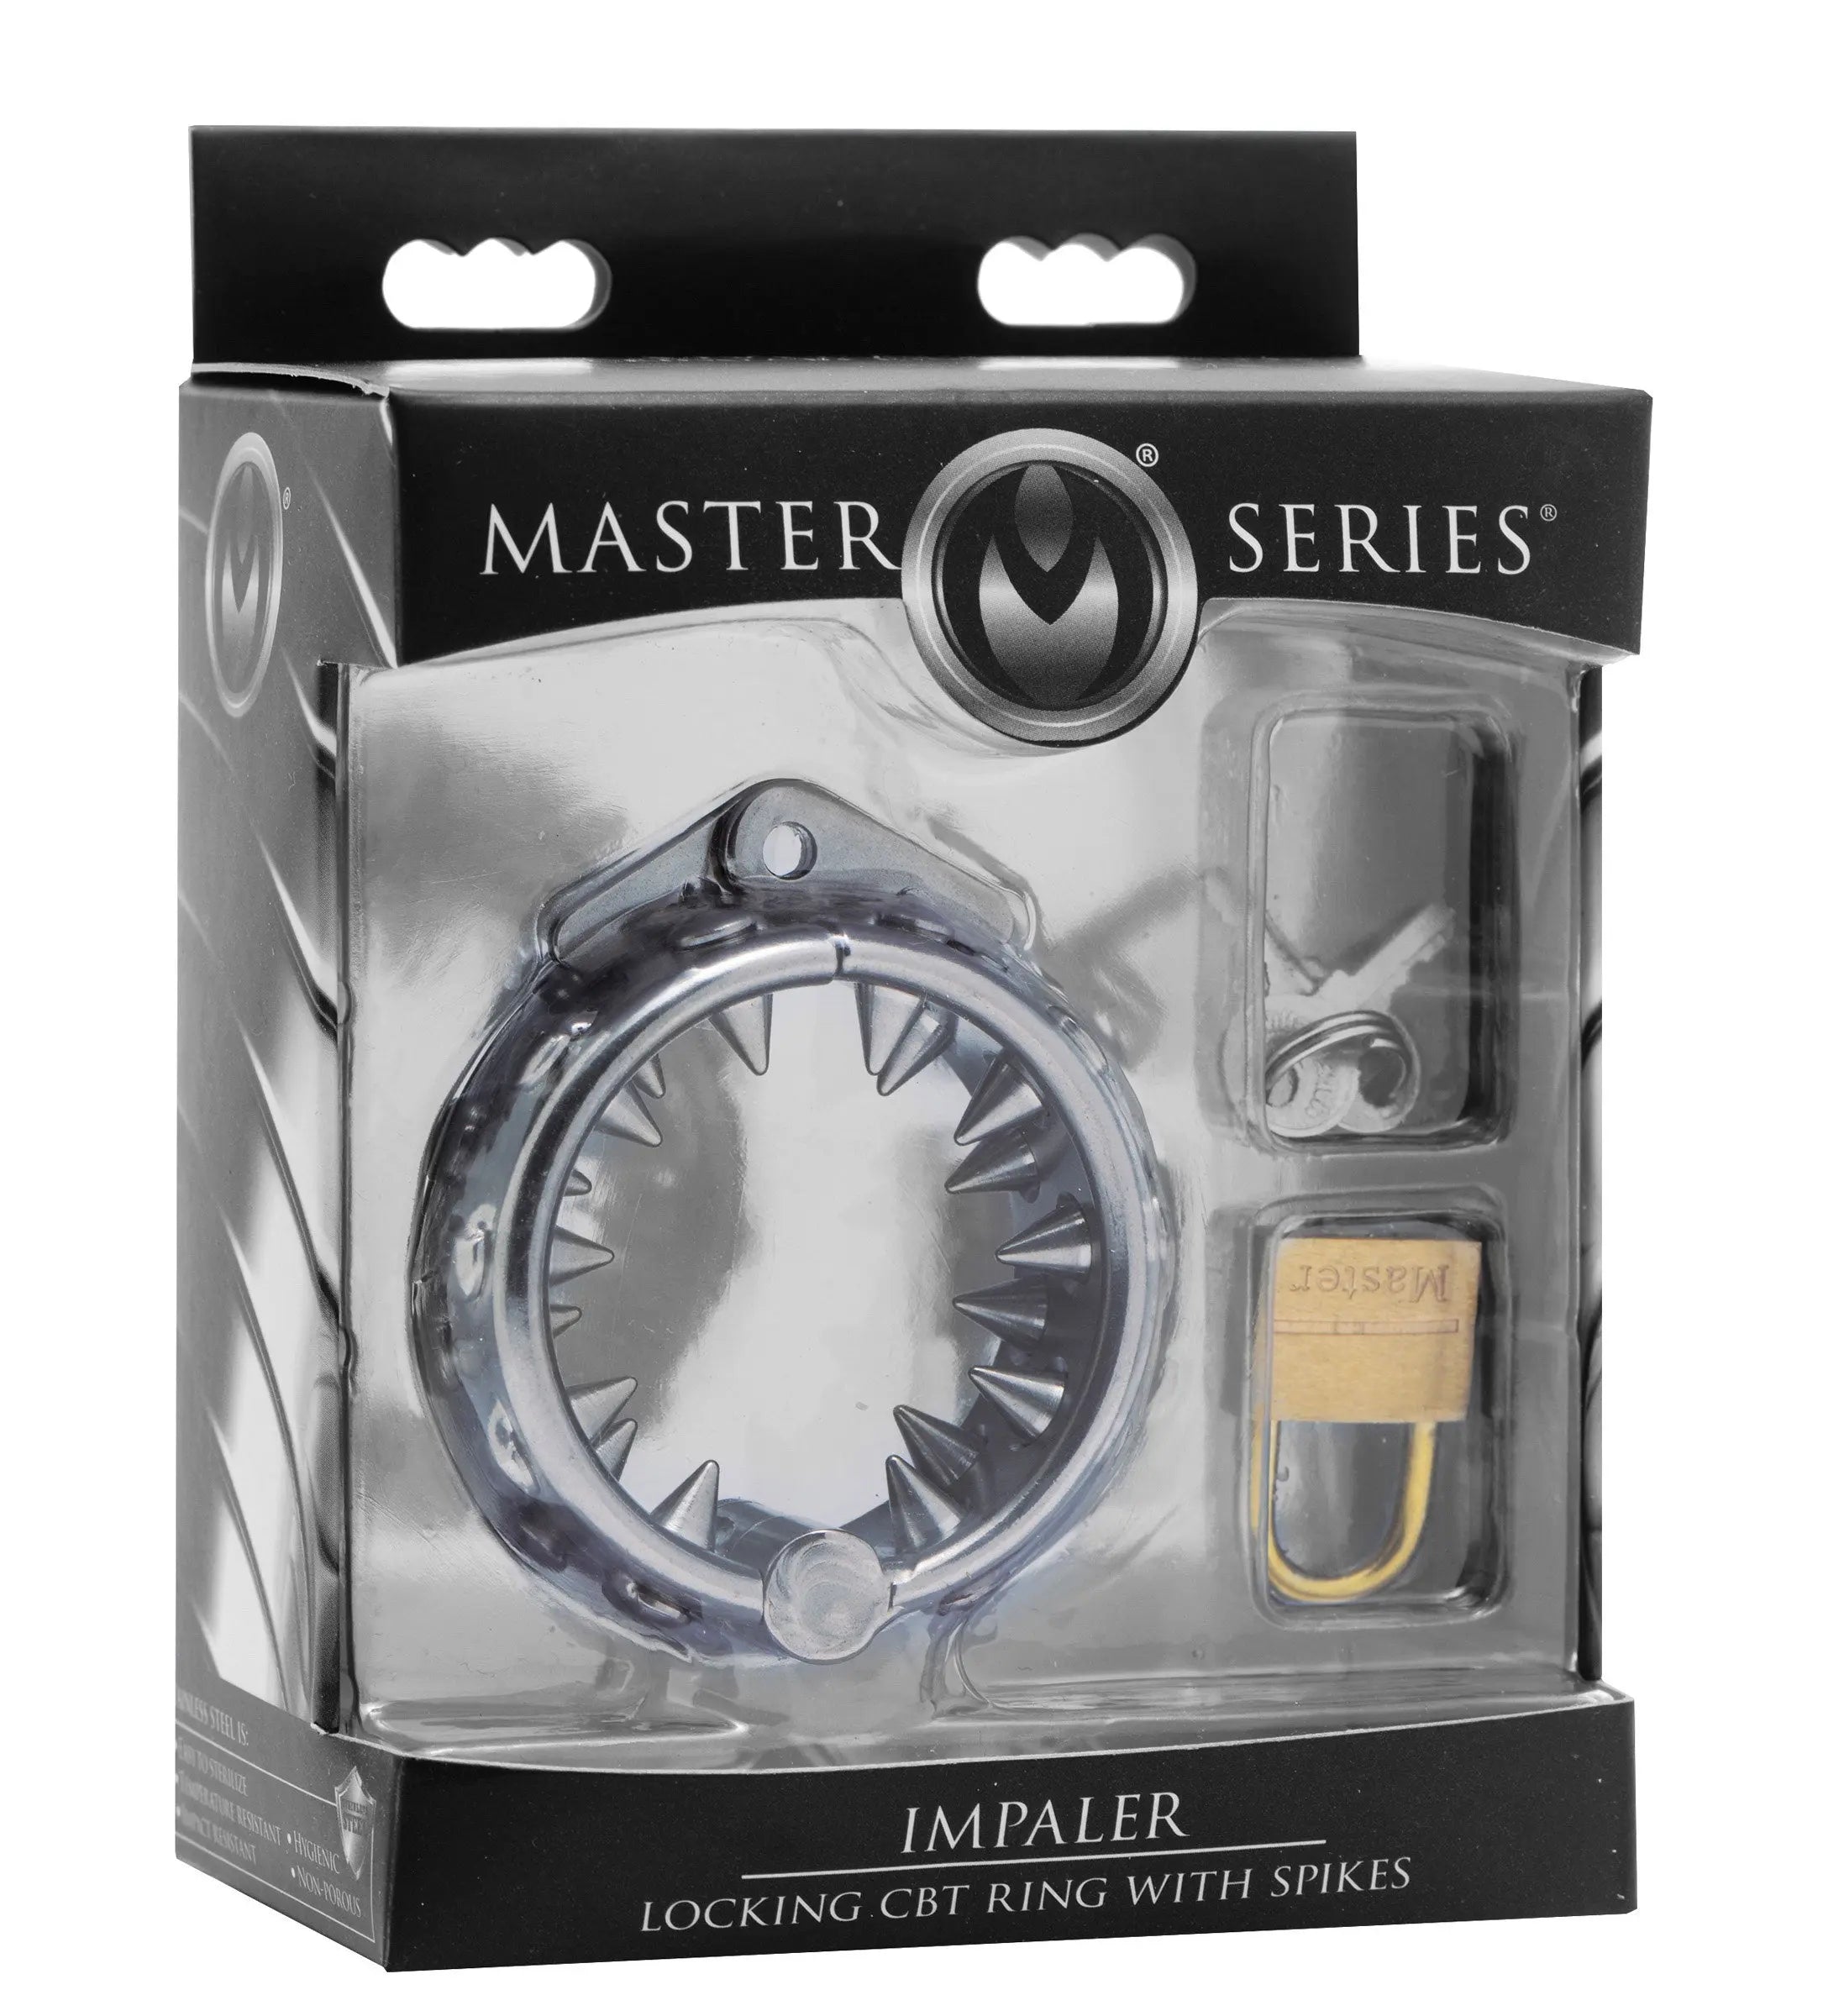 Impaler Locking Cbt Ring With Spikes XR Brands Master Series